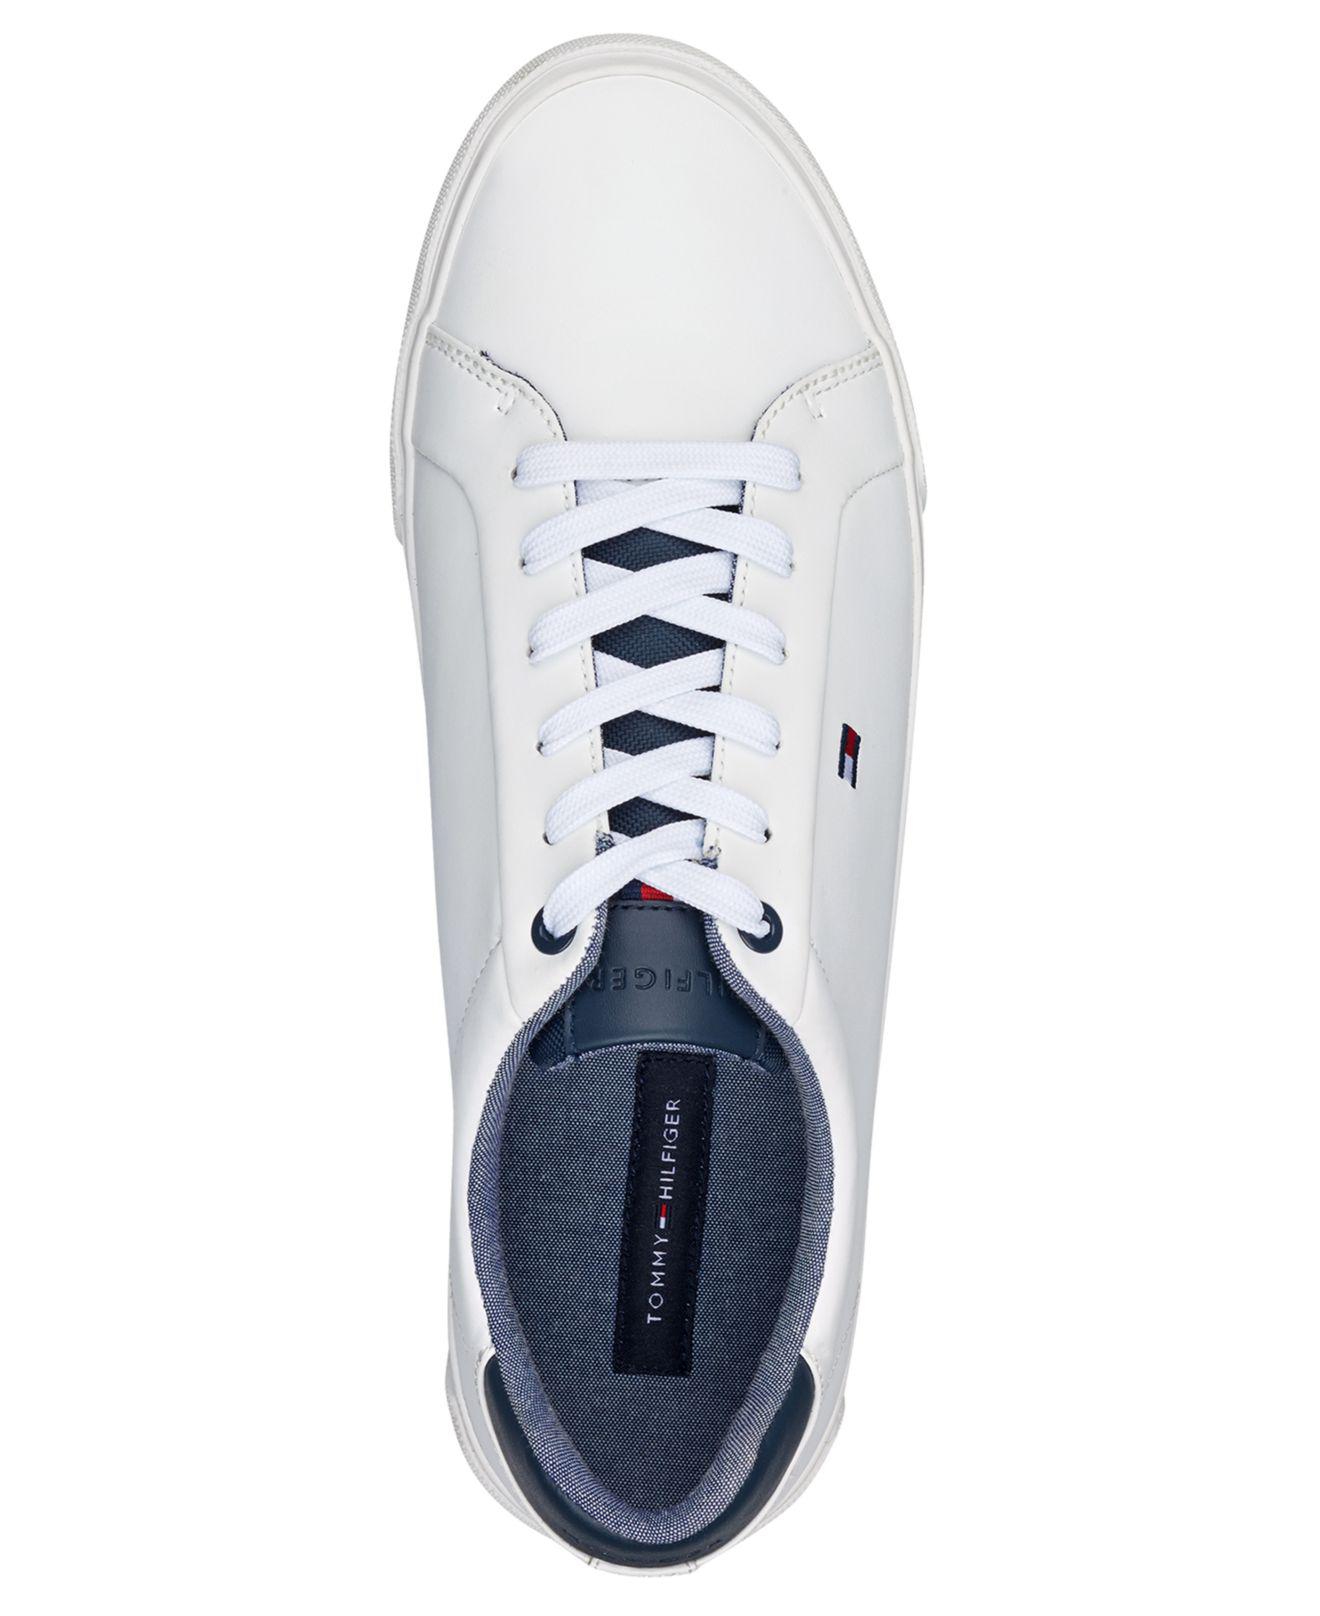 Tommy Hilfiger Leather Ref Low-top Sneakers in White for Men - Lyst